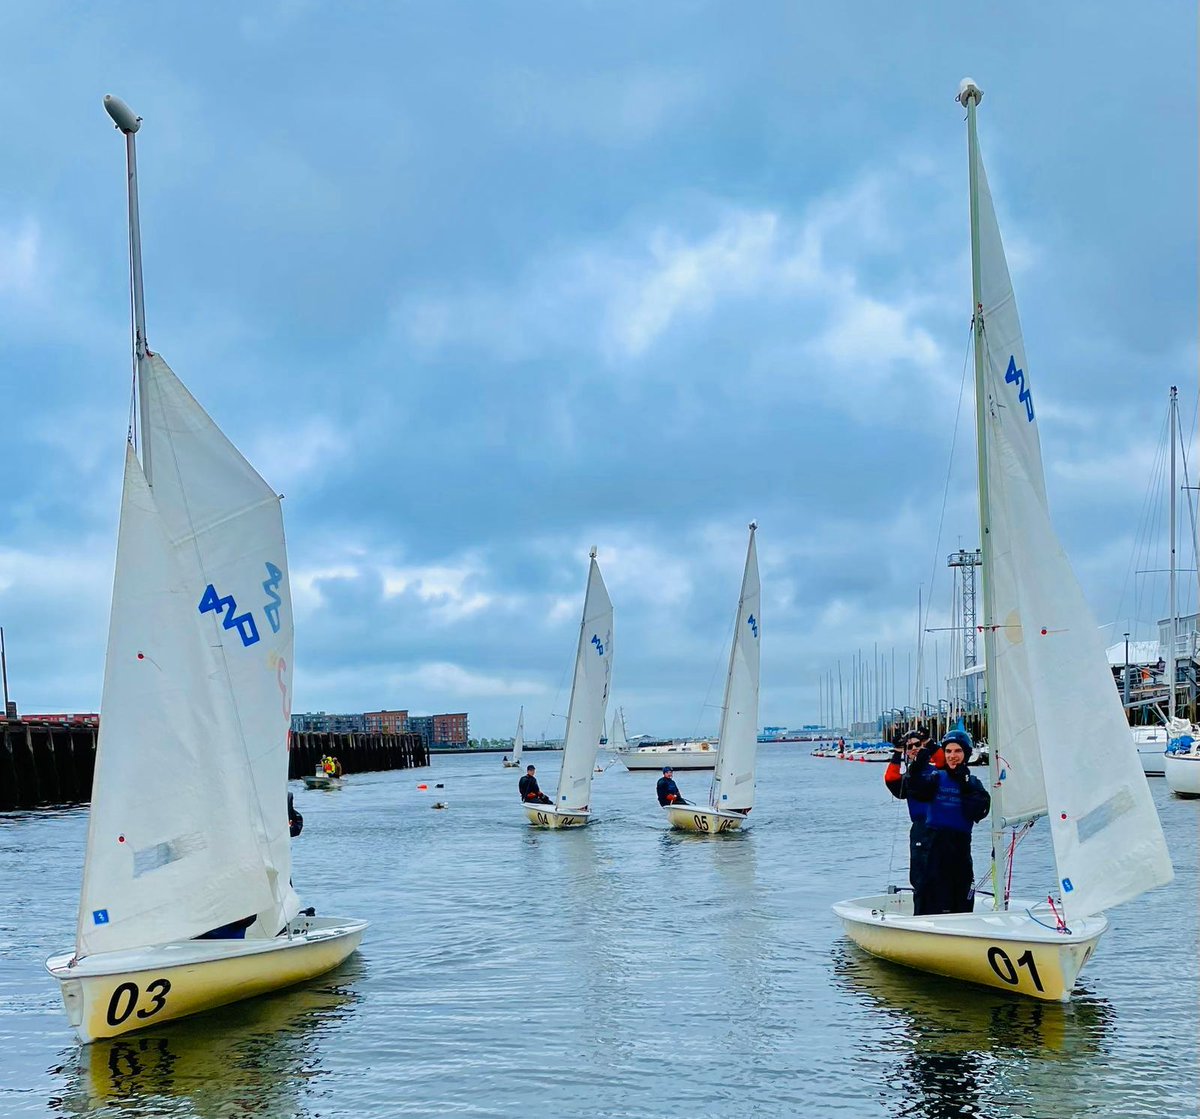 I am excited to spread the good news as your Nantasket Nor’easter Sailing team has finished the seasons with an 8-0 record and are your MBL Sailing Division B Champions! Congratulations to all the student-athletes involved in EARNING this! GO NOR'EASTERS!